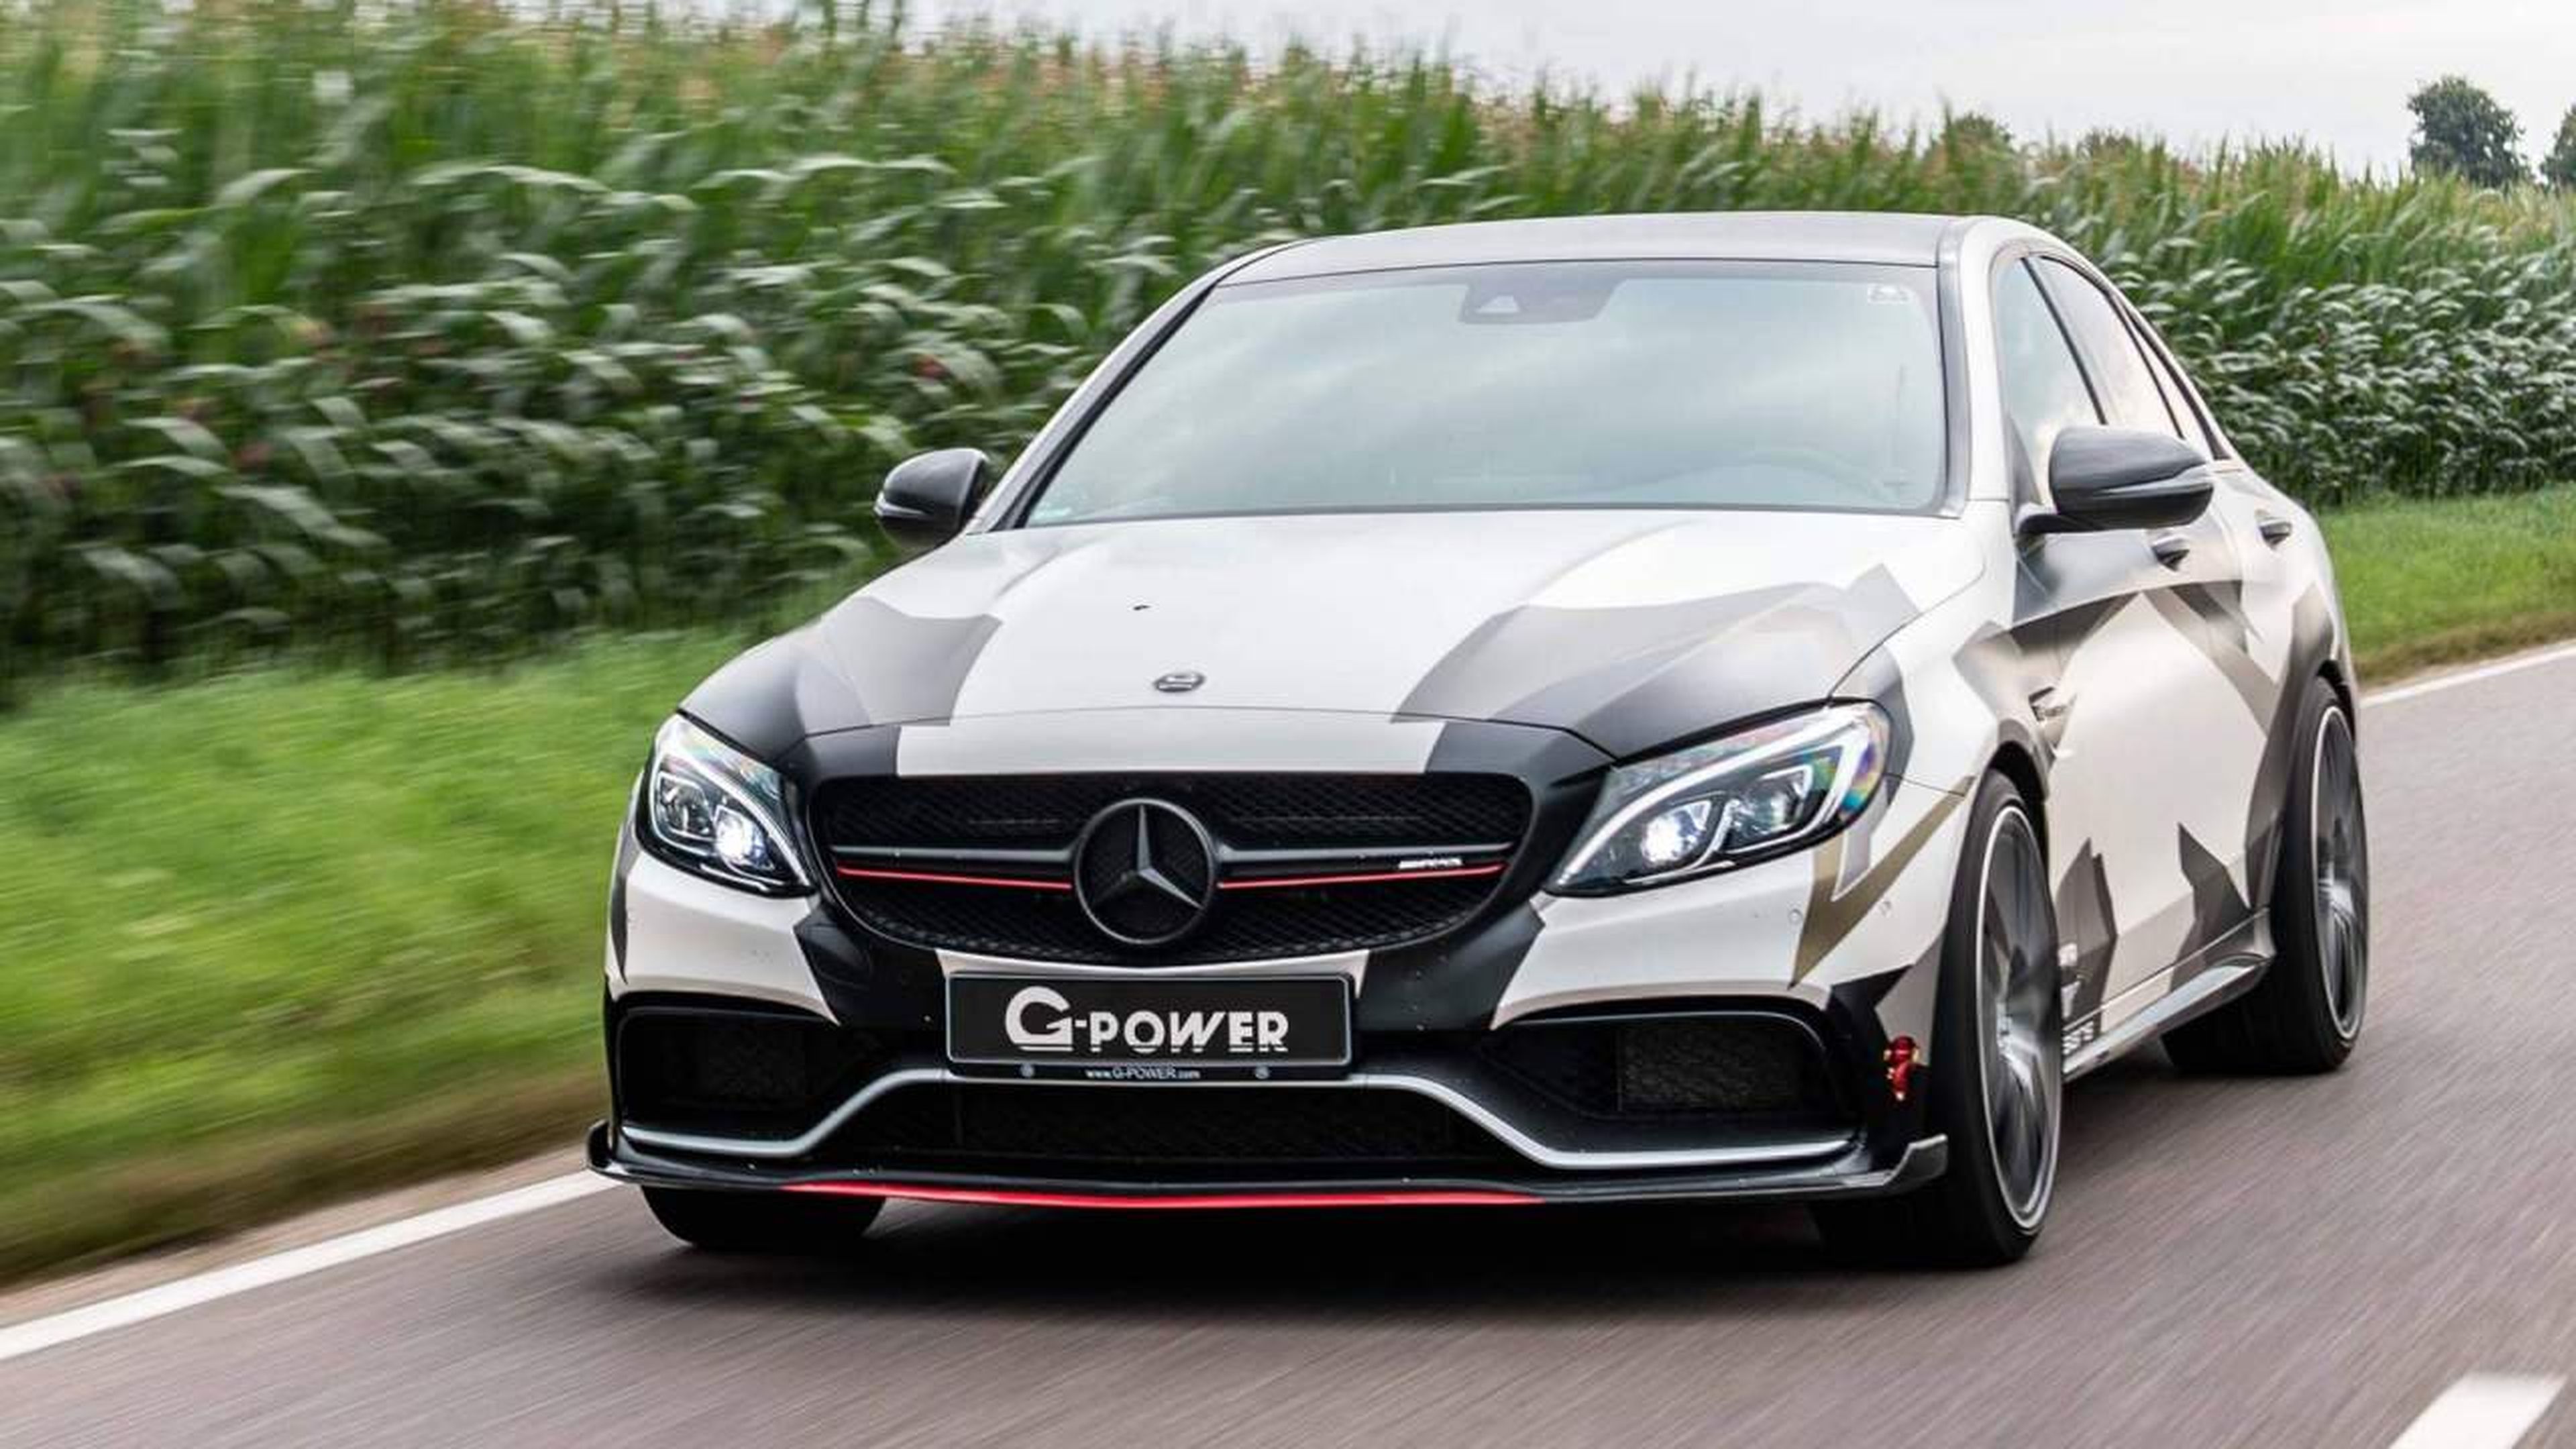 Mercedes-AMG C63 S by G-Power